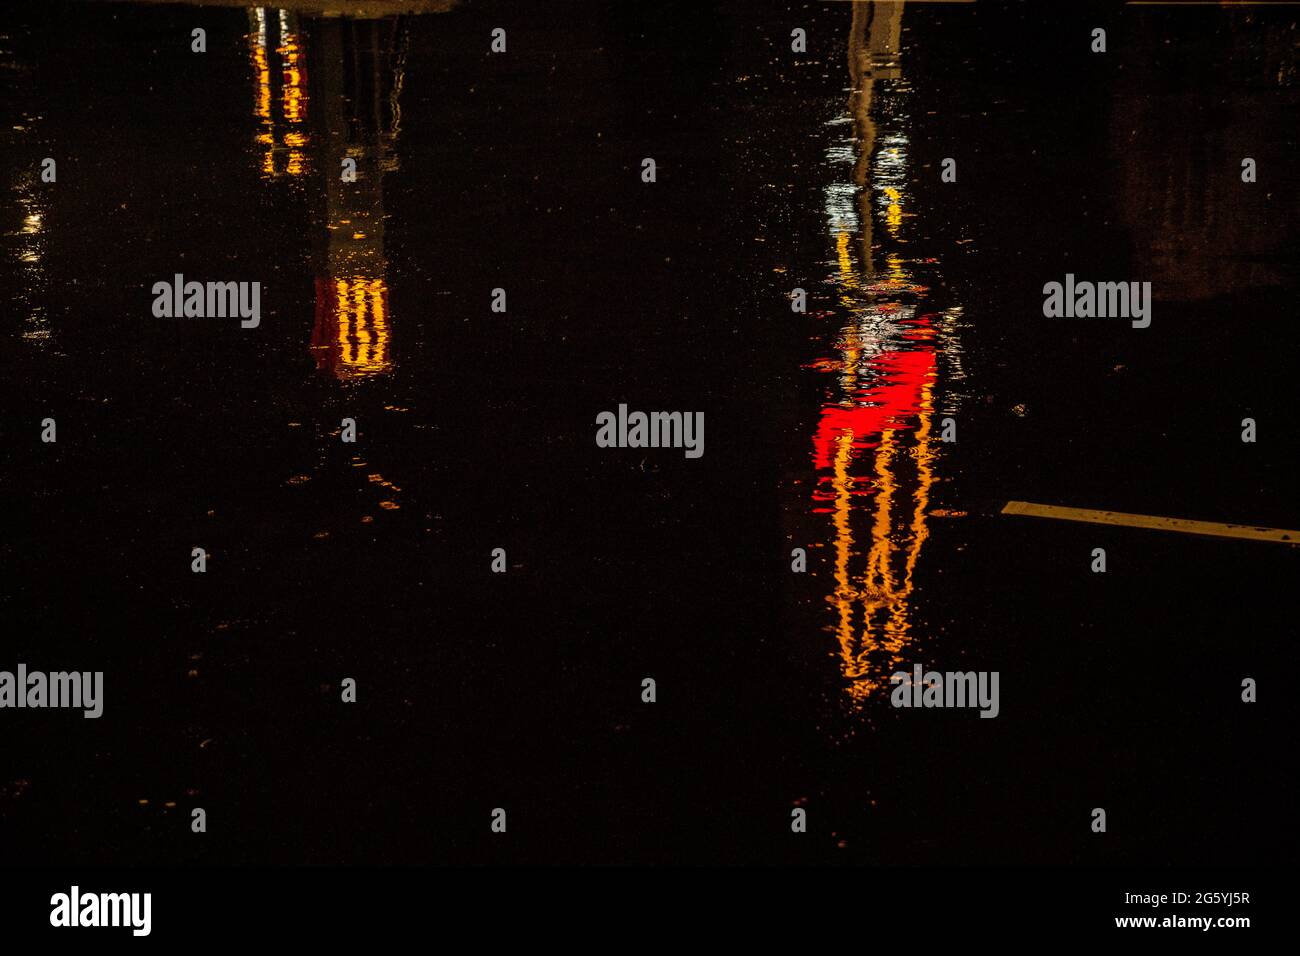 Distorted reflection of a McDonalds sign in puddles at night Stock Photo